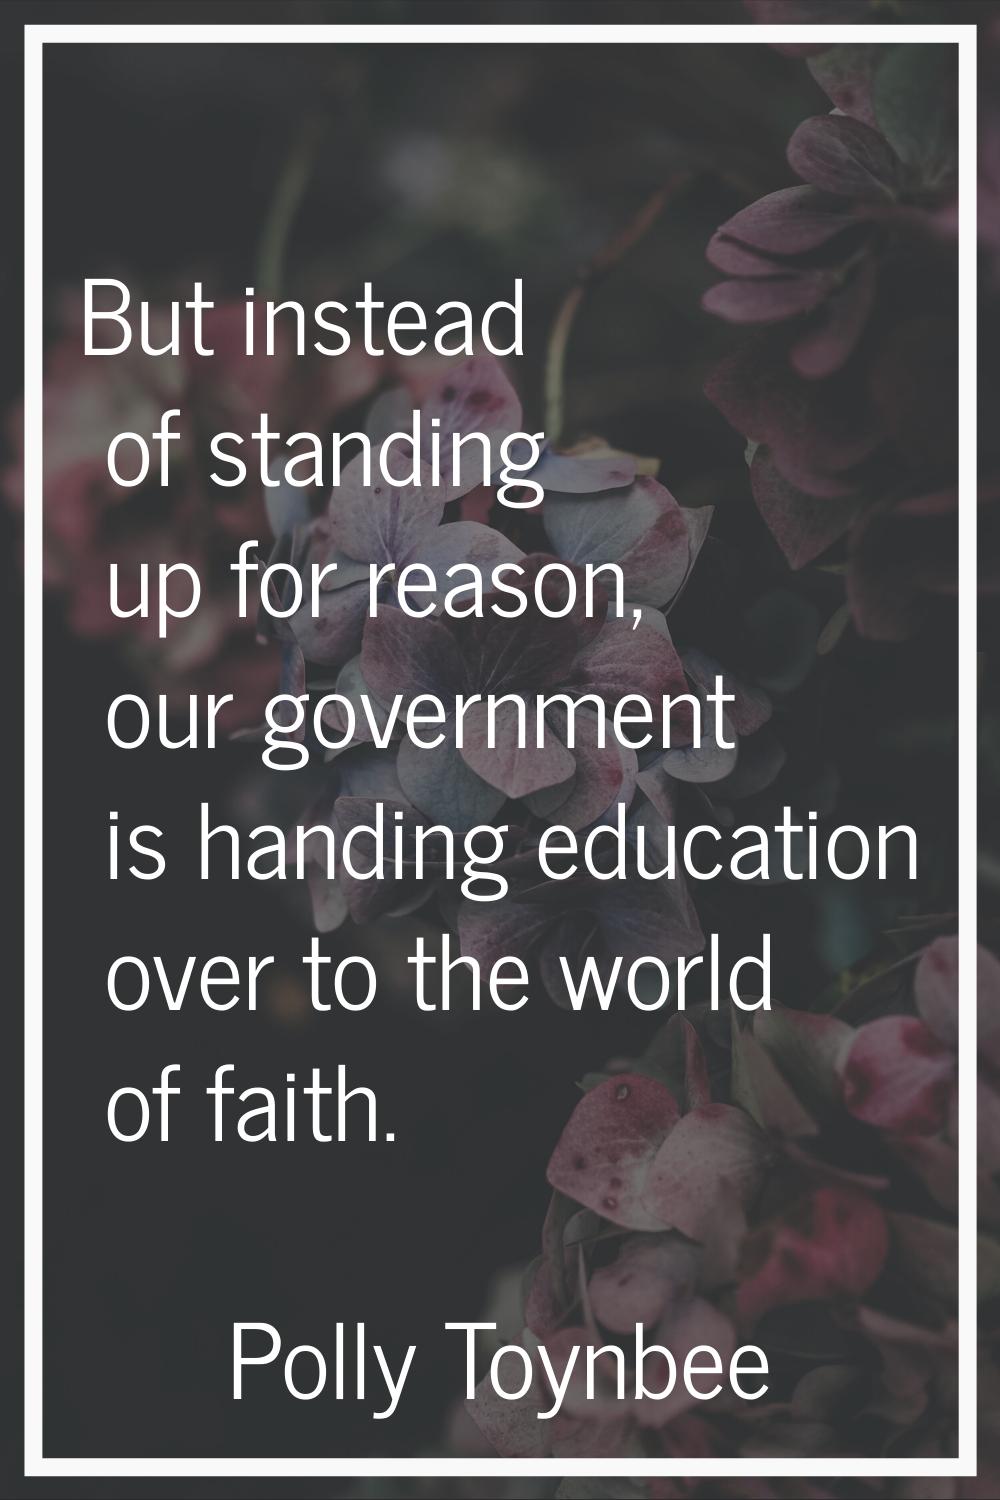 But instead of standing up for reason, our government is handing education over to the world of fai